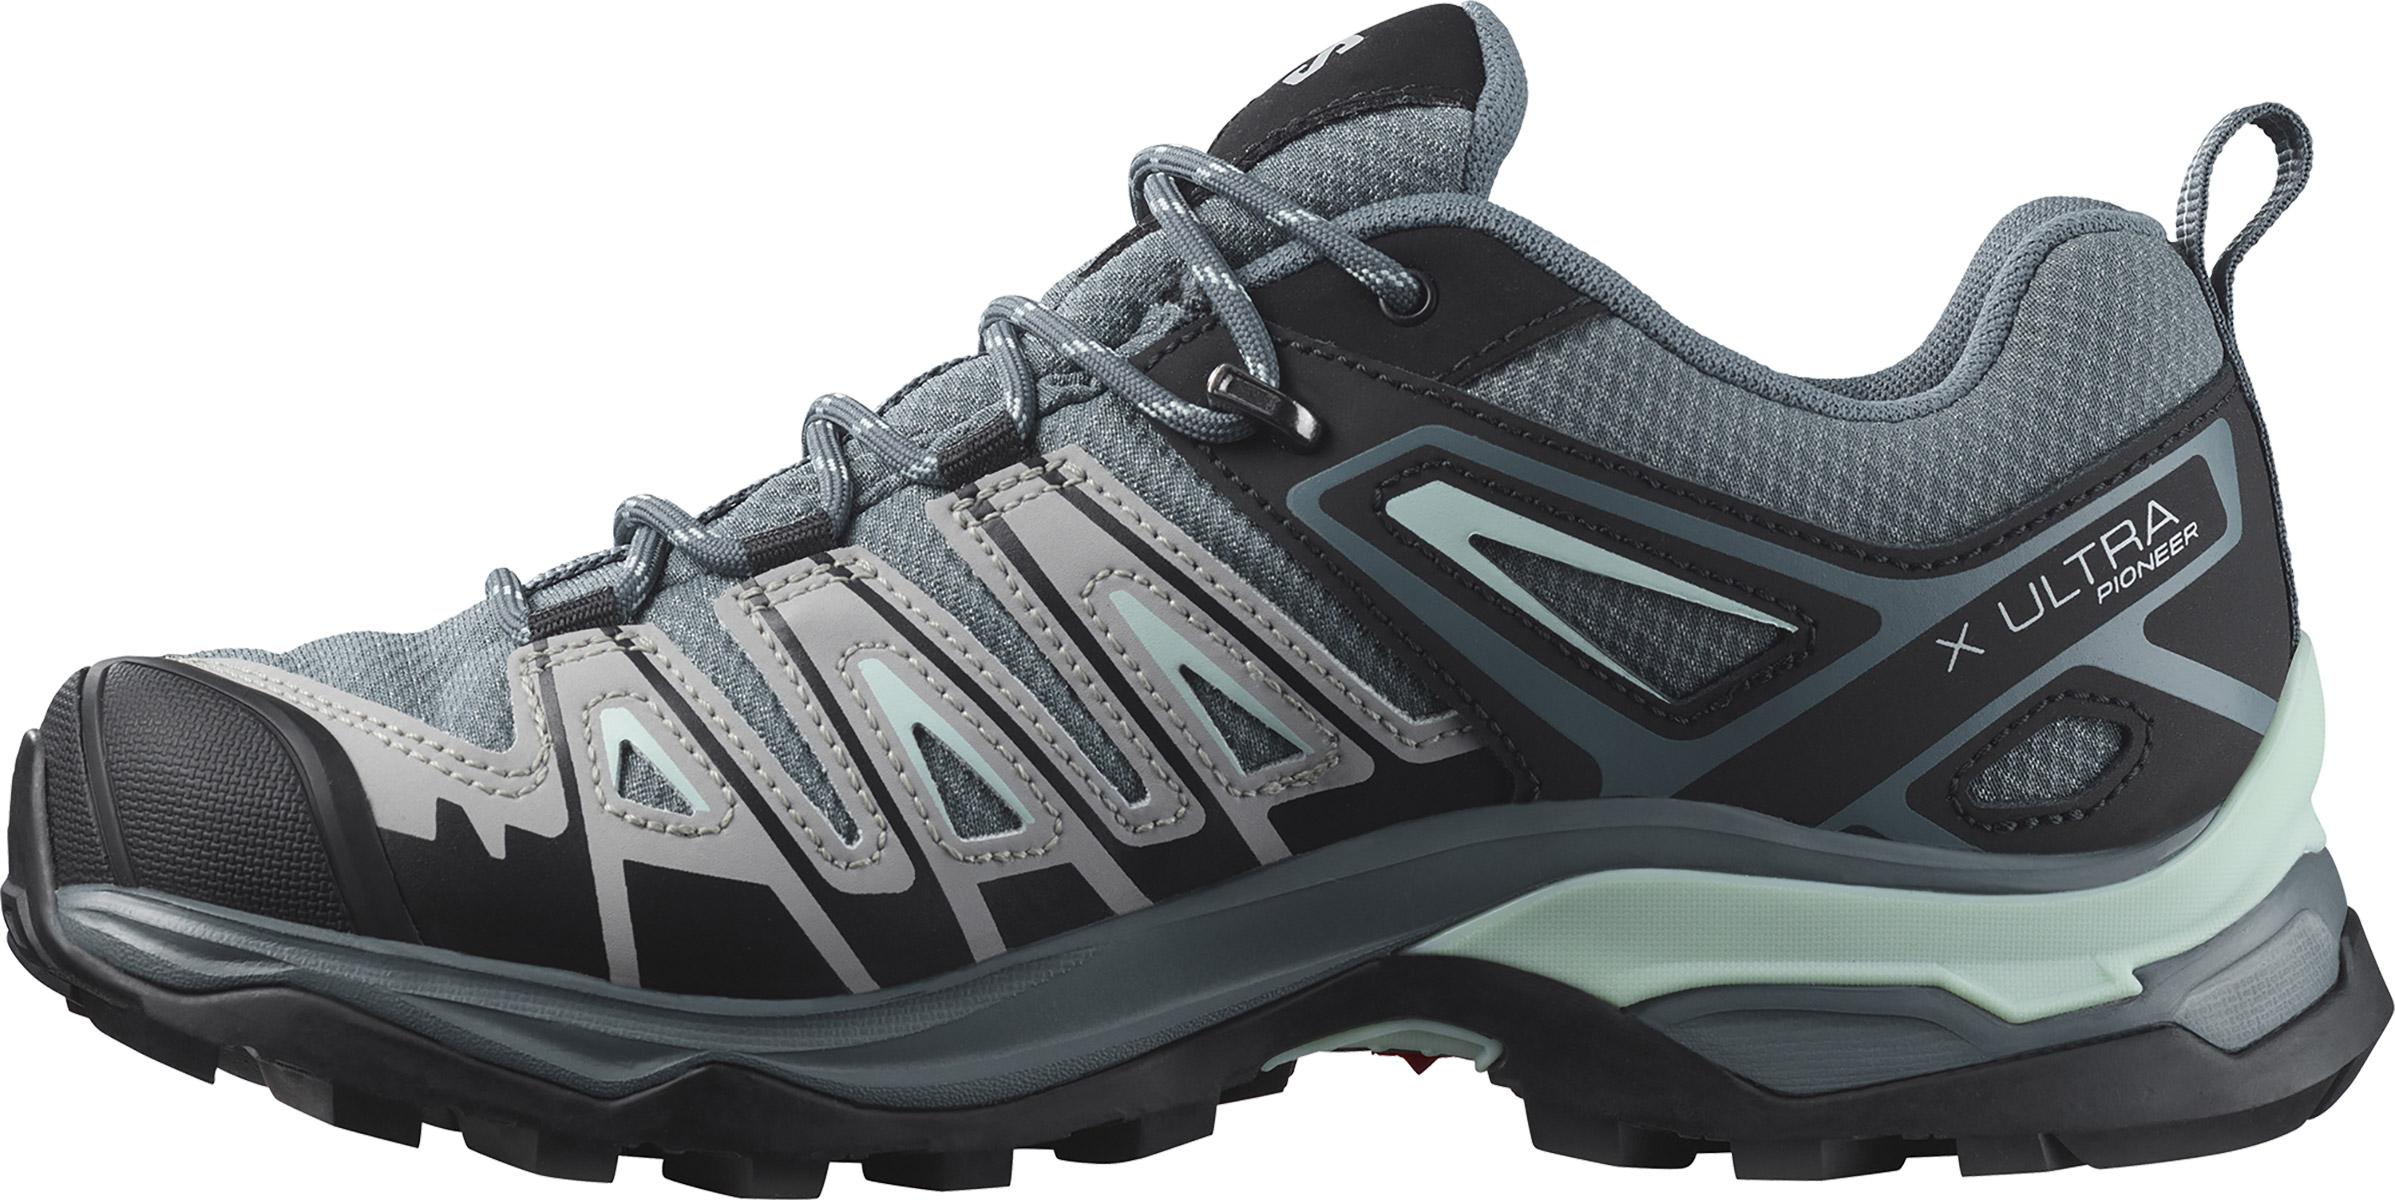 Salomon Womens X Ultra Pioneer Gore-tex Hiking Shoes - Stormy Weather/alloy